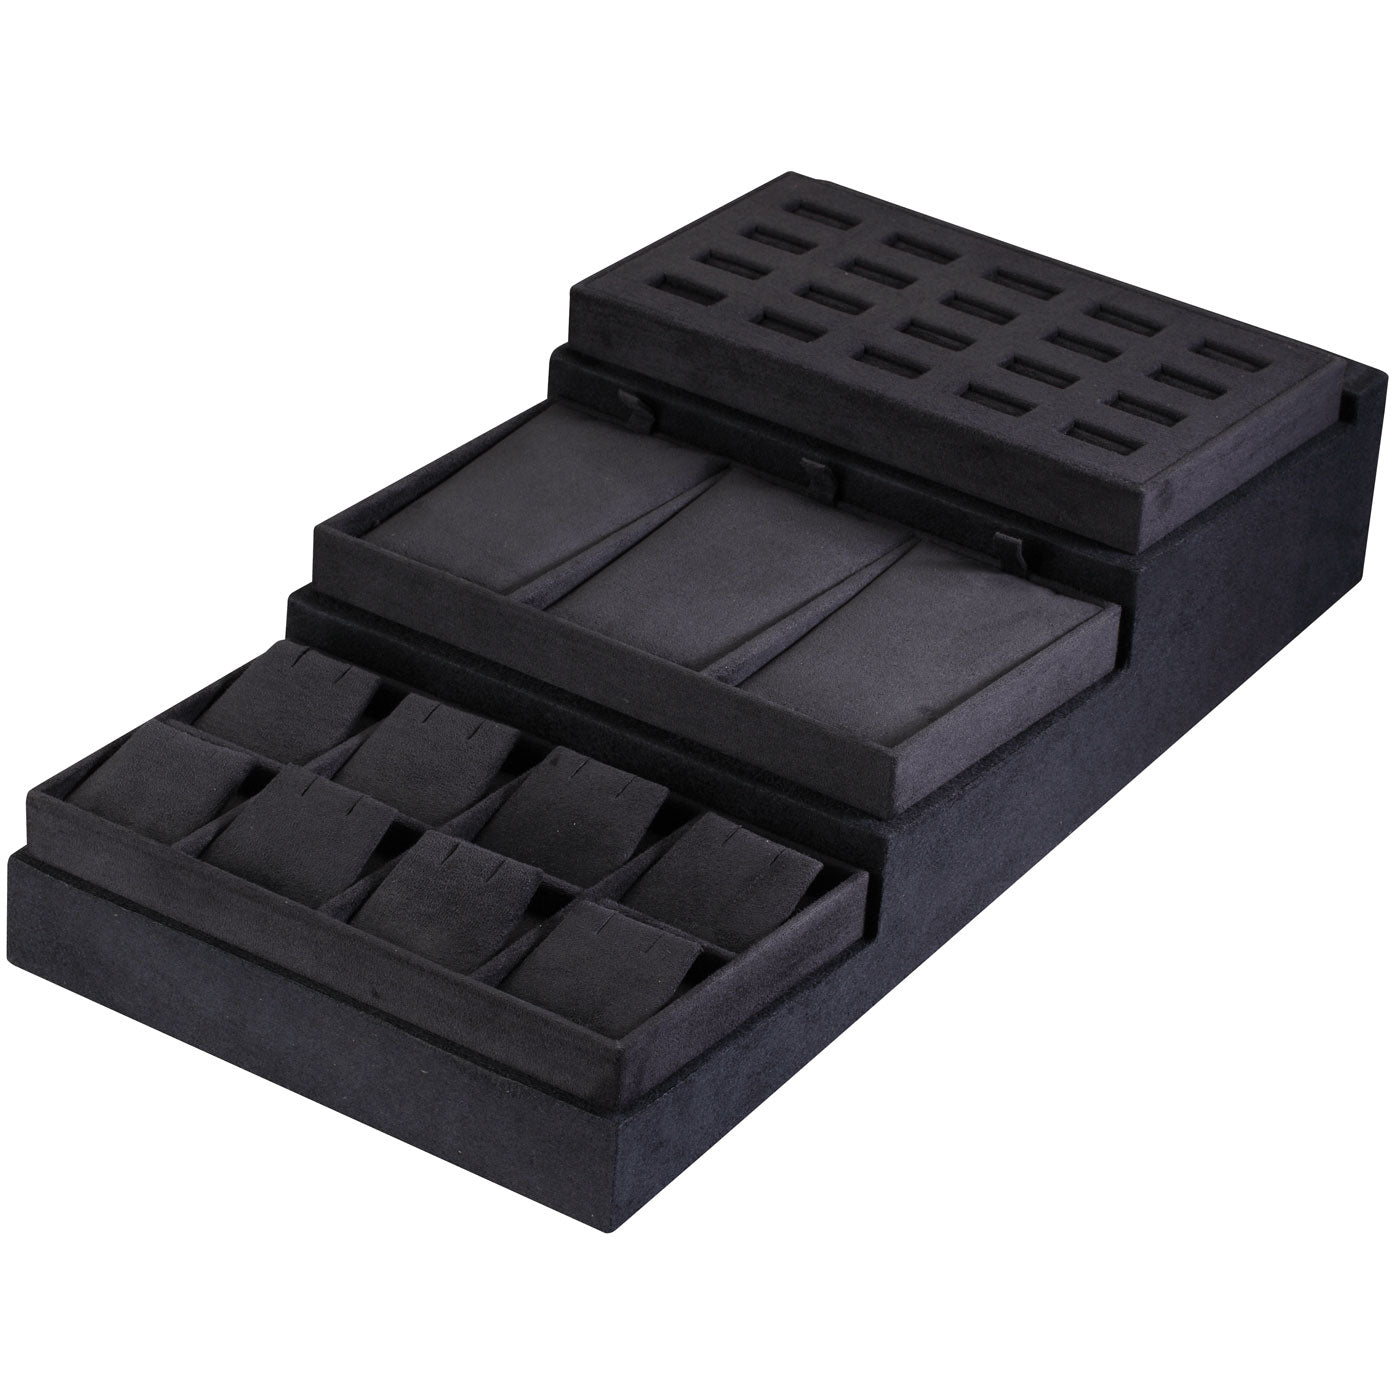 3-Level Stepped Risers for Presentation Trays, 15.75" L x 8.5" W